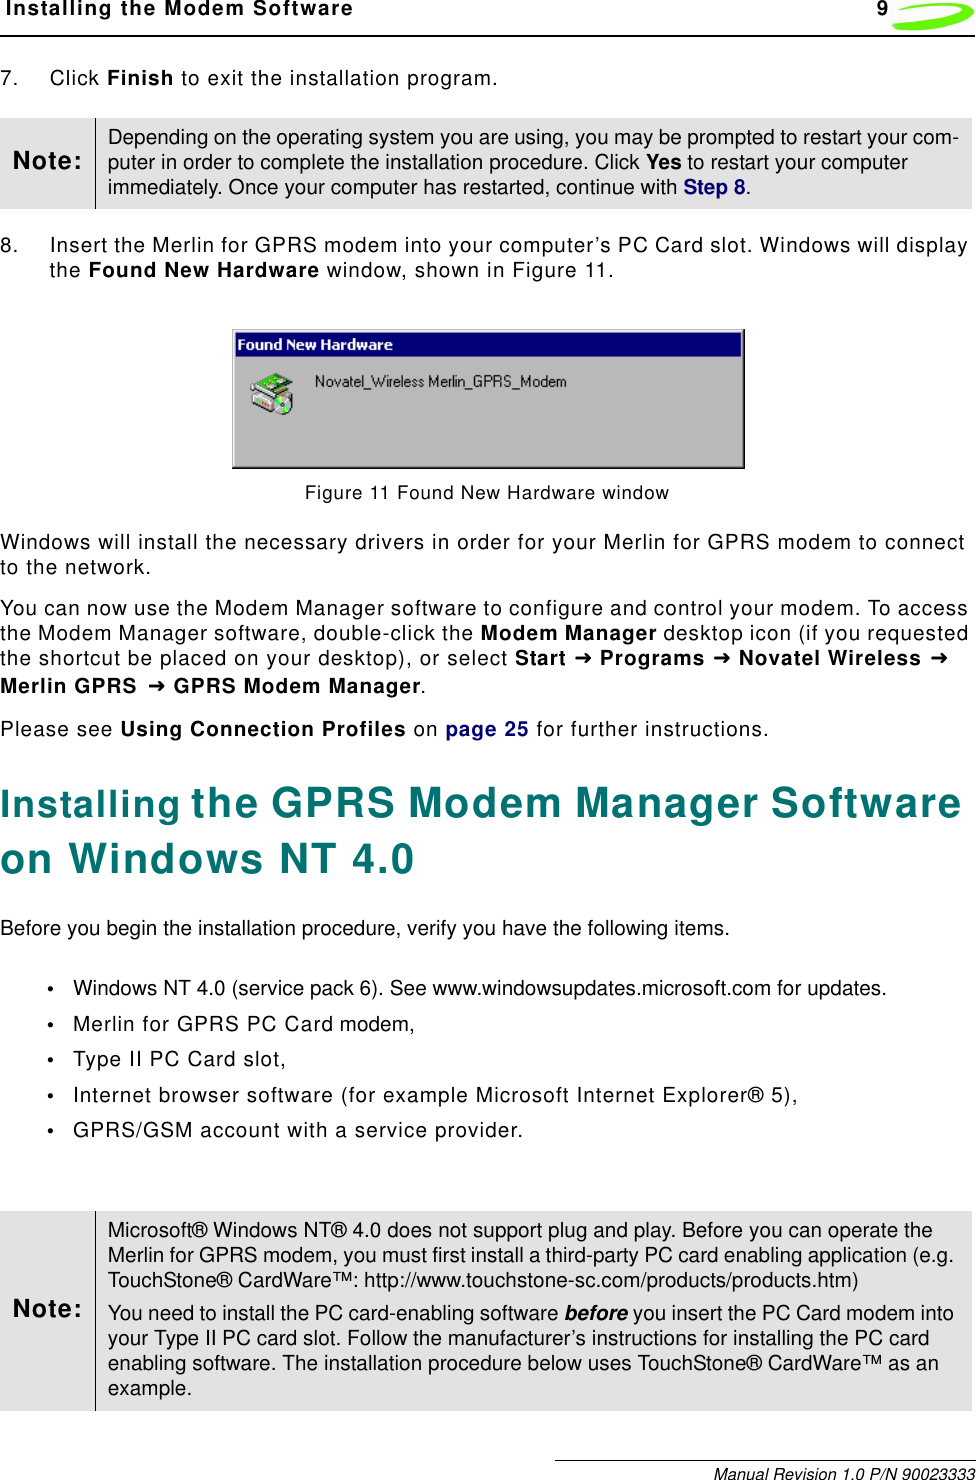  Installing the Modem Software 9Manual Revision 1.0 P/N 900233337. Click Finish to exit the installation program. 8. Insert the Merlin for GPRS modem into your computer’s PC Card slot. Windows will display the Found New Hardware window, shown in Figure 11.Figure 11 Found New Hardware windowWindows will install the necessary drivers in order for your Merlin for GPRS modem to connect to the network.You can now use the Modem Manager software to configure and control your modem. To access the Modem Manager software, double-click the Modem Manager desktop icon (if you requested the shortcut be placed on your desktop), or select Start !!!! Programs !!!! Novatel Wireless !!!!Merlin GPRS !!!! GPRS Modem Manager.Please see Using Connection Profiles on page 25 for further instructions.Installing the GPRS Modem Manager Software on Windows NT 4.0Before you begin the installation procedure, verify you have the following items.•Windows NT 4.0 (service pack 6). See www.windowsupdates.microsoft.com for updates.•Merlin for GPRS PC Card modem,•Type II PC Card slot,•Internet browser software (for example Microsoft Internet Explorer® 5),•GPRS/GSM account with a service provider.Note: Depending on the operating system you are using, you may be prompted to restart your com-puter in order to complete the installation procedure. Click Yes to restart your computer immediately. Once your computer has restarted, continue with Step 8.Note:Microsoft® Windows NT® 4.0 does not support plug and play. Before you can operate the Merlin for GPRS modem, you must first install a third-party PC card enabling application (e.g. TouchStone® CardWare™: http://www.touchstone-sc.com/products/products.htm)You need to install the PC card-enabling software before you insert the PC Card modem into your Type II PC card slot. Follow the manufacturer’s instructions for installing the PC card enabling software. The installation procedure below uses TouchStone® CardWare™ as an example.